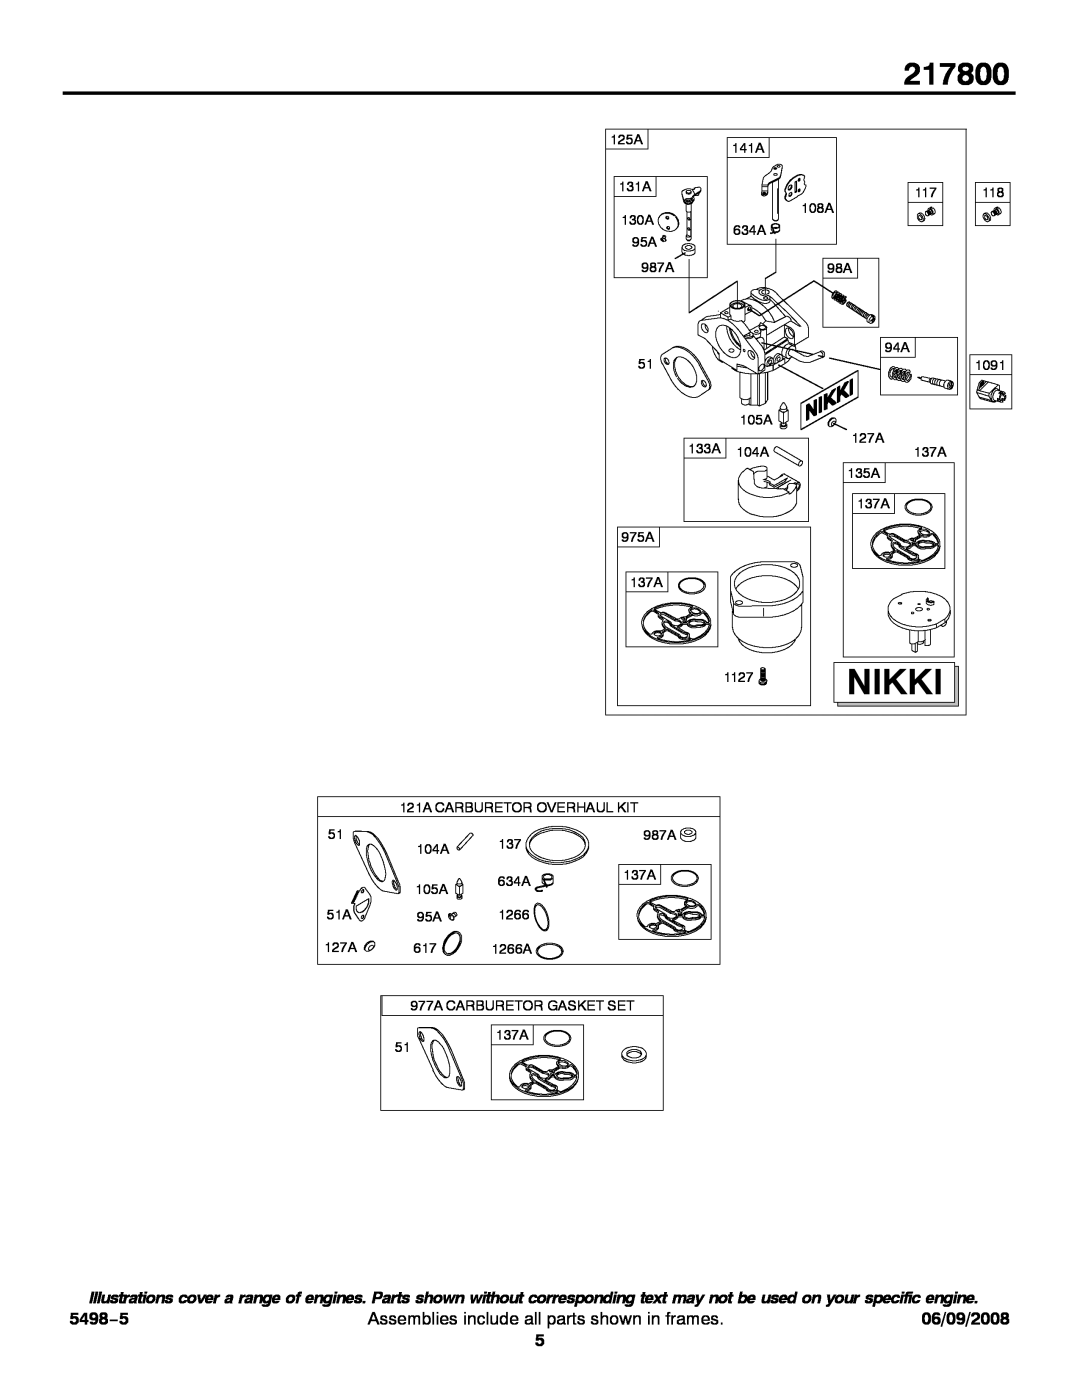 Briggs & Stratton 217800 service manual Nikki, 5498−5, Assemblies include all parts shown in frames, 06/09/2008 